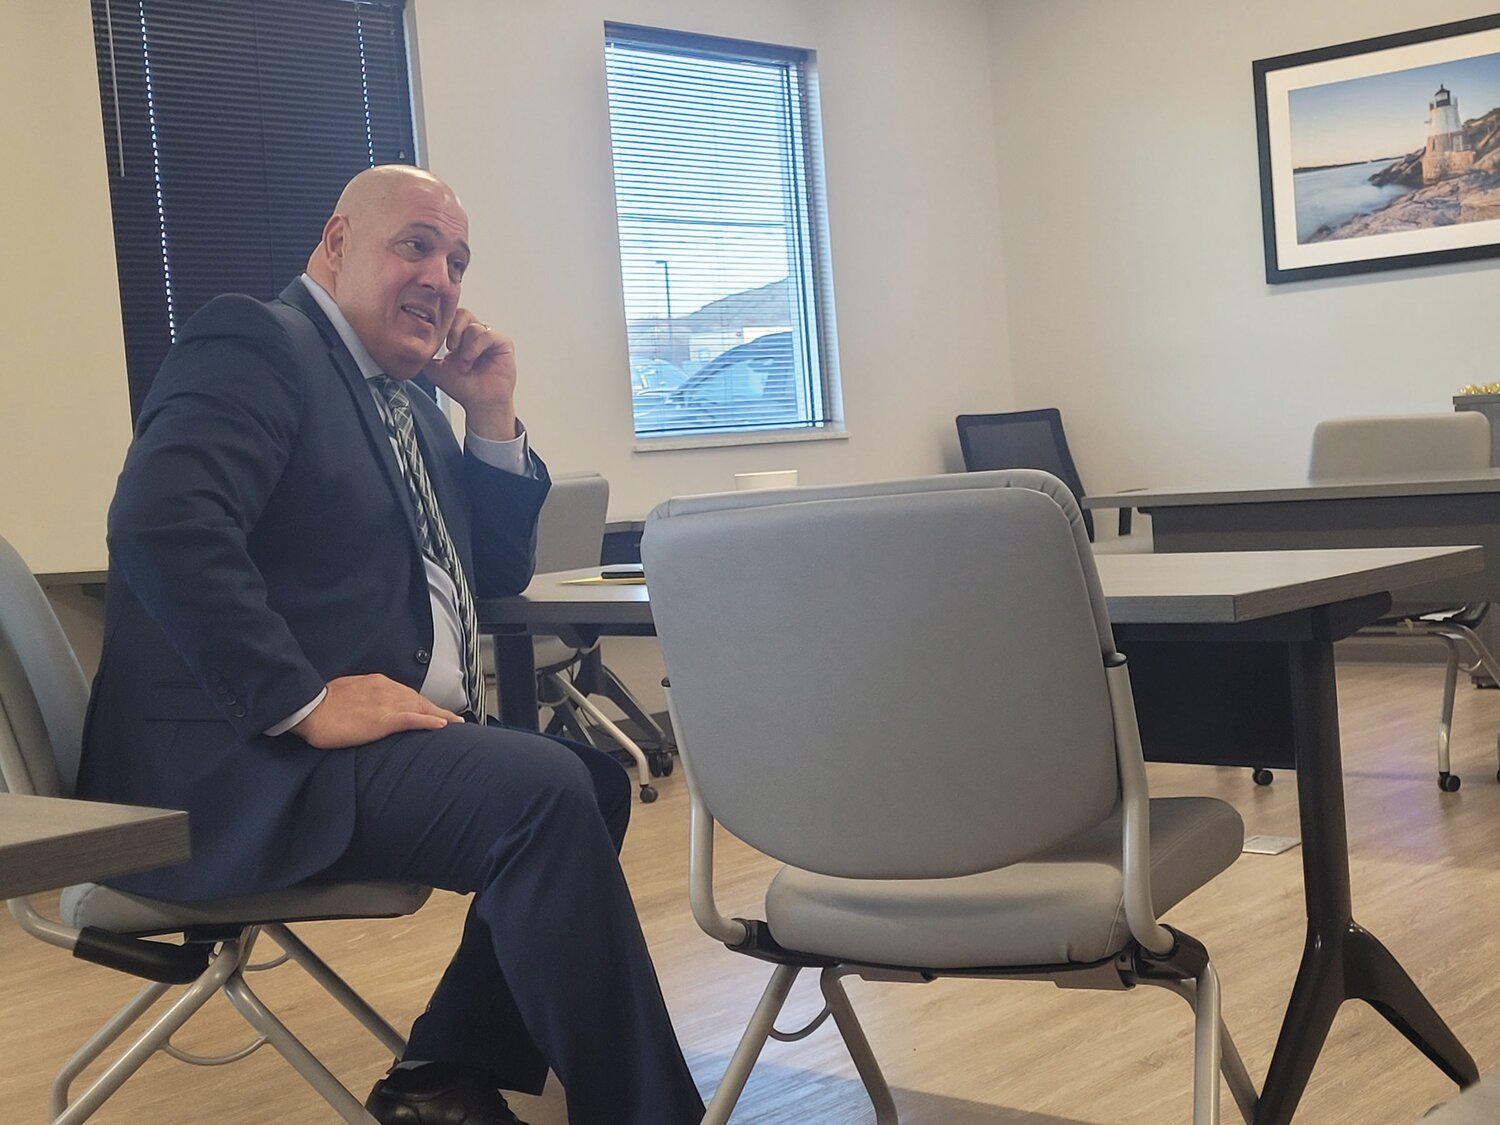 LAST DAY: To start his last day on the job, Rhode Island Resource Recovery Corporation (RIRRC) Executive Director Joseph Reposa awaited the start of a pair of public meetings.